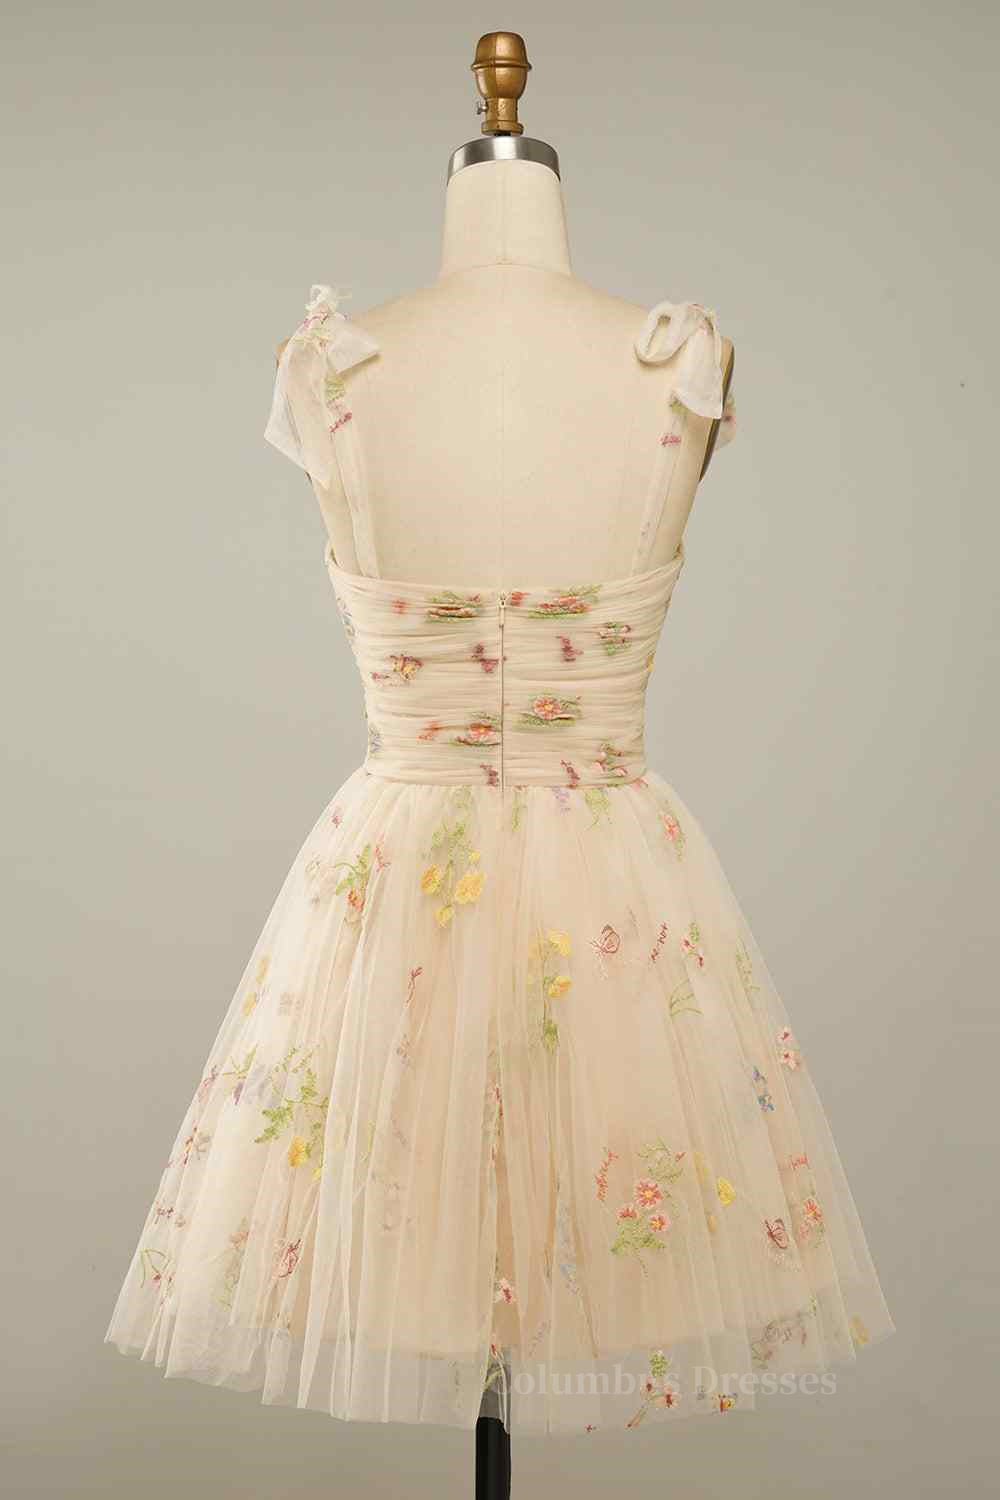 Party Dress Style Shop, Champagne A-line Bow Tie Straps Pleated Applique Mini Homecoming Dress